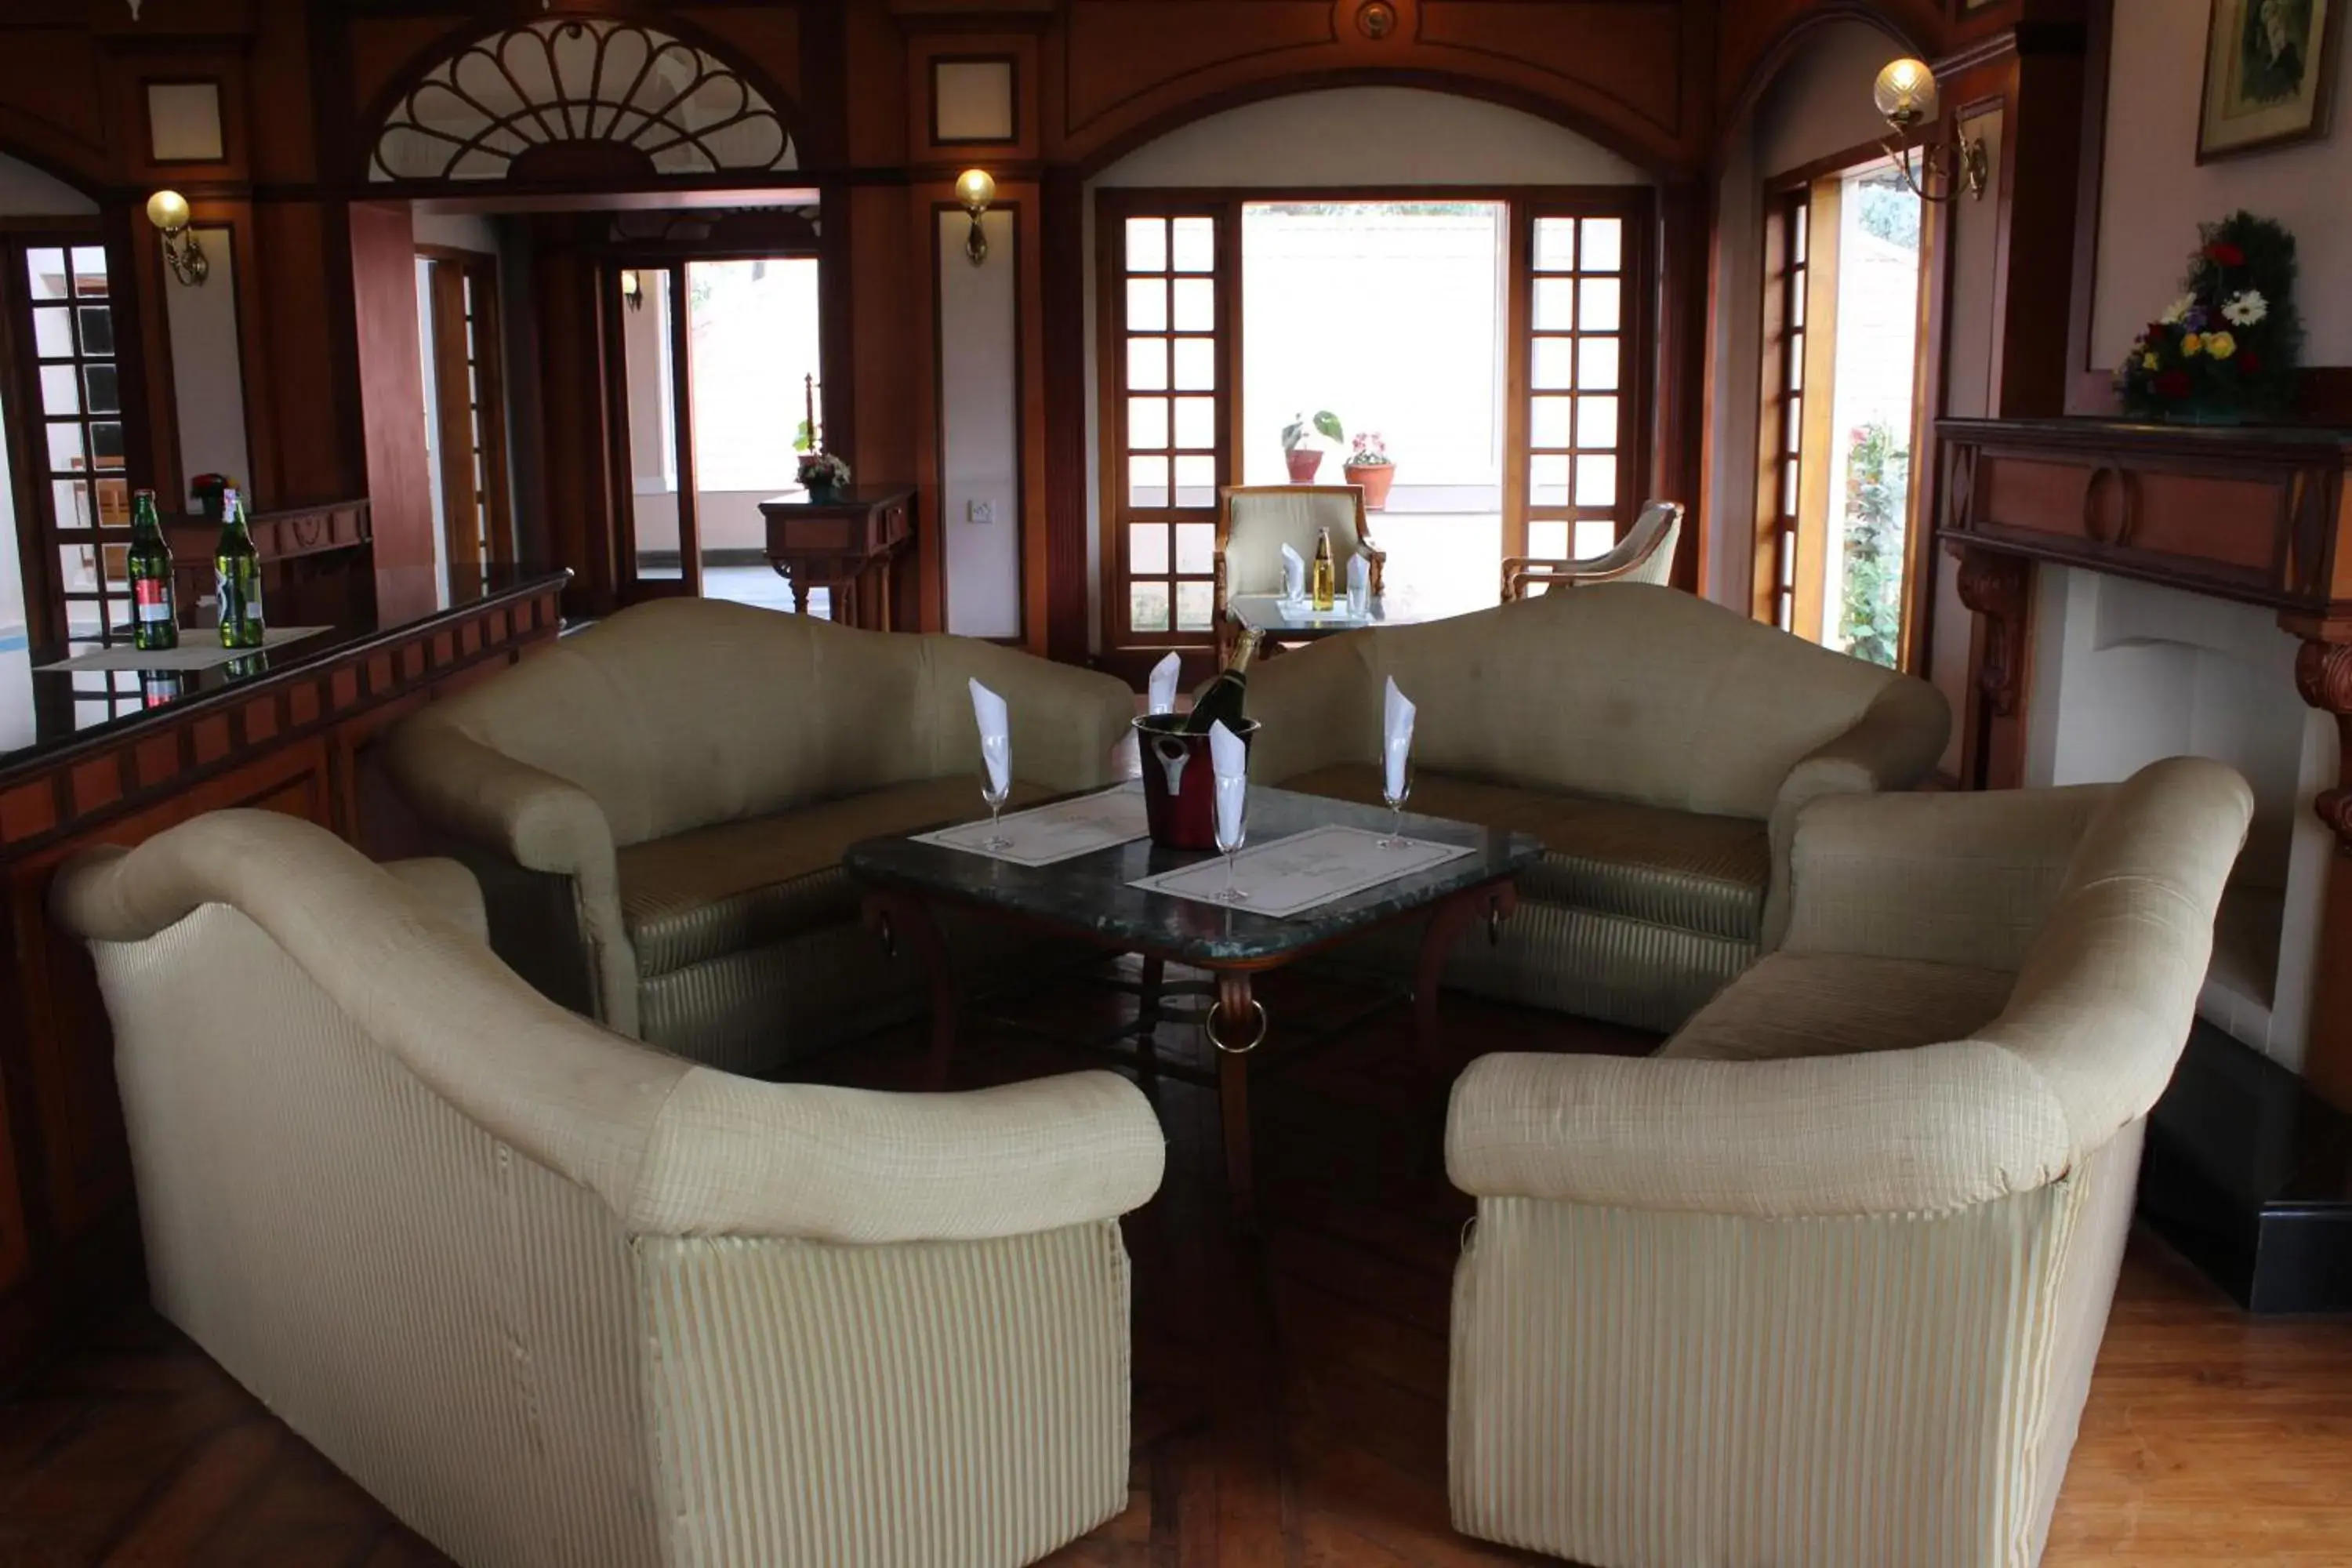 Lounge or bar, Seating Area in Ktdc Tea County Resort